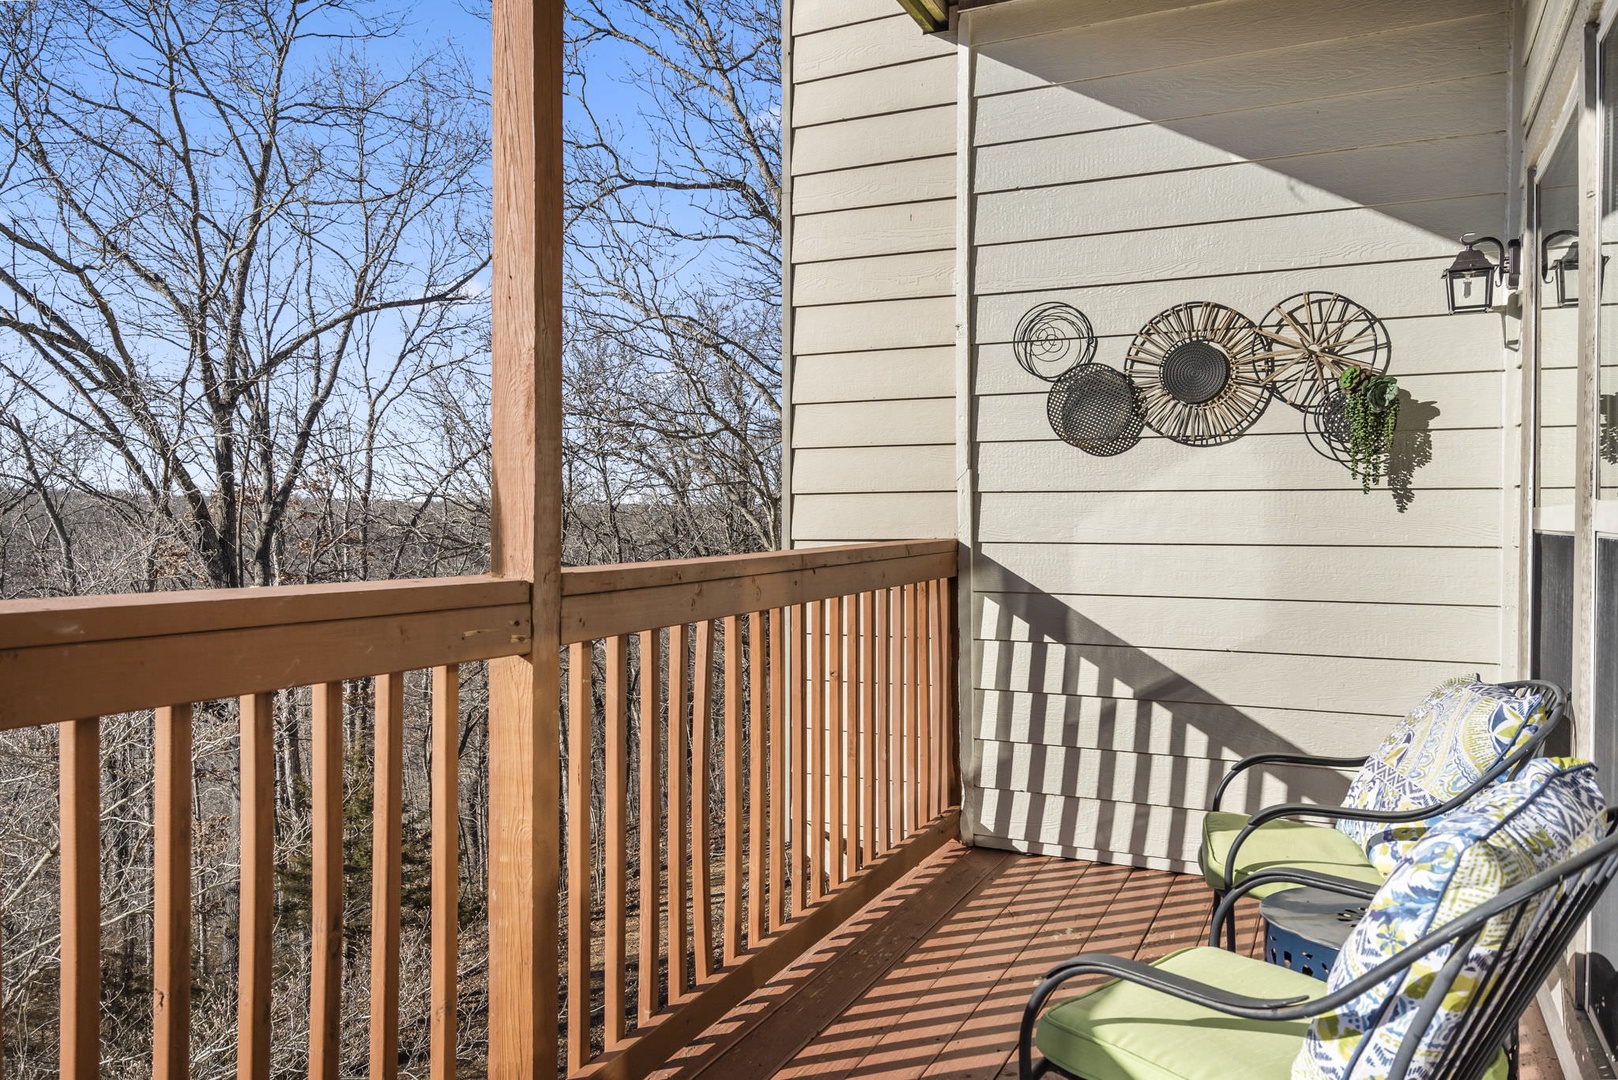 Deck with outdoor seating